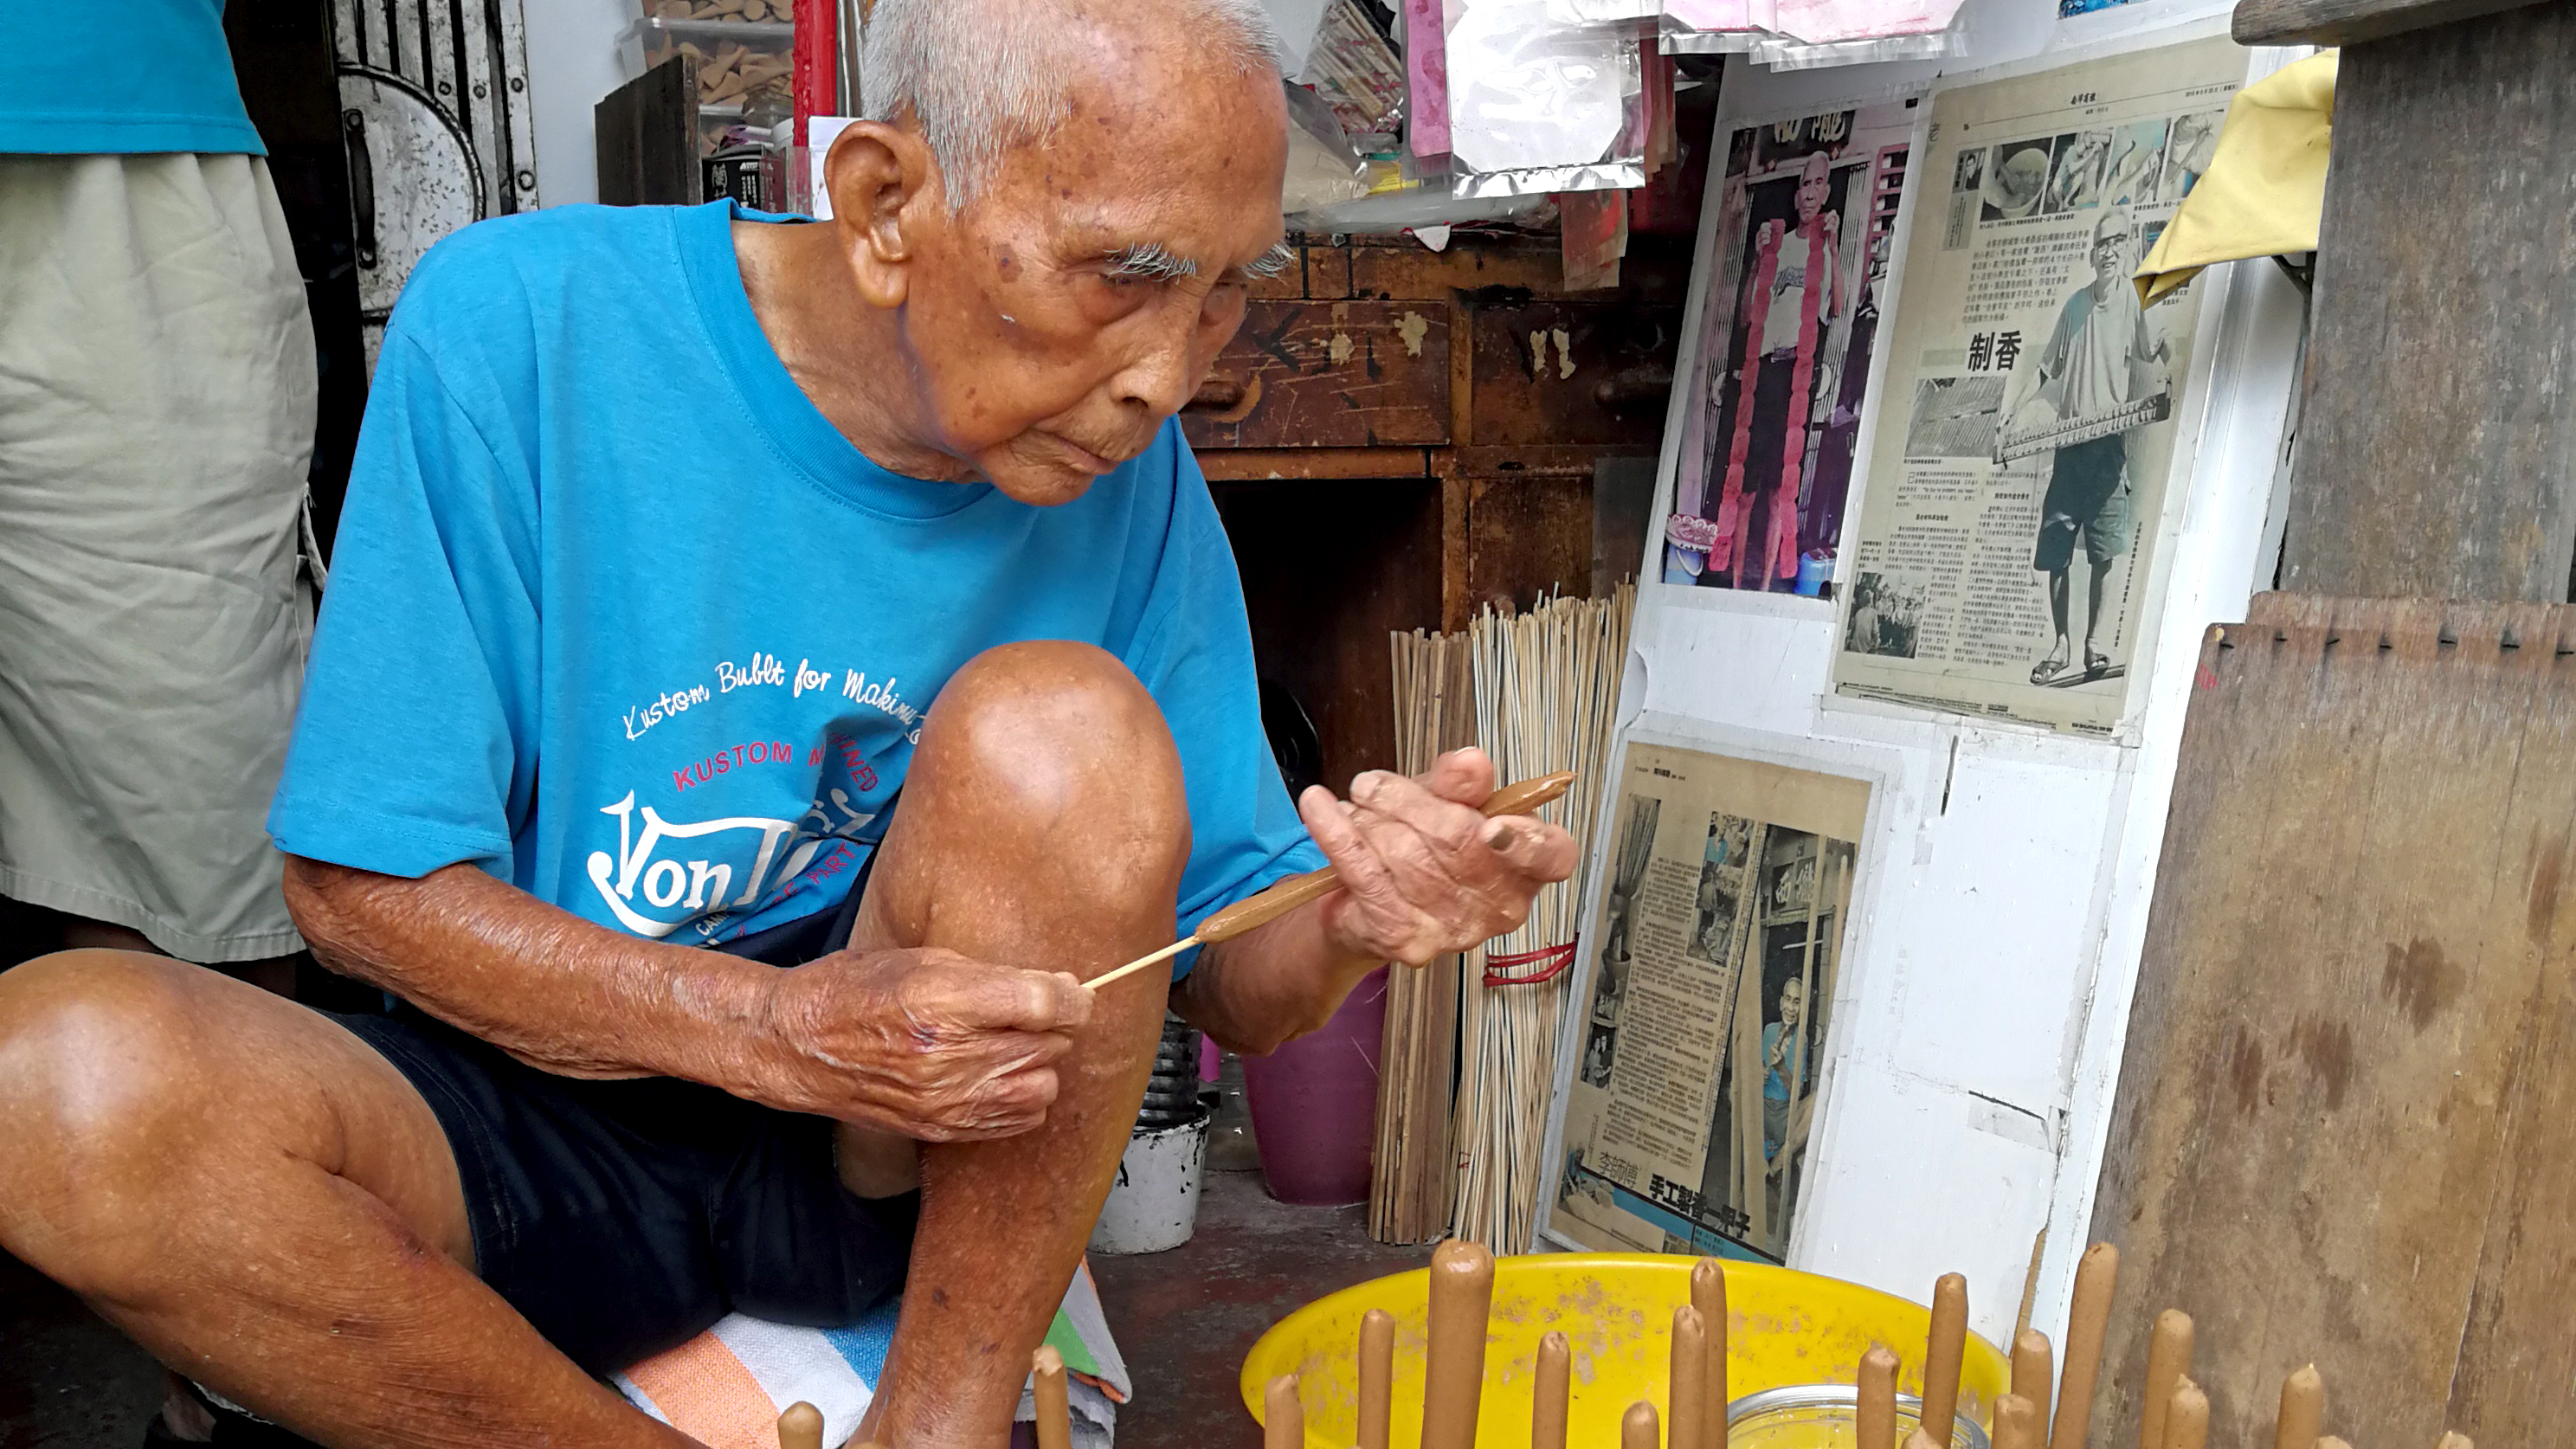 Keep your eyes peeled for the remaining traditional crafts of Penang — old shops where graying artisans make signboards, handmade shoes, anchors and rattan furniture. Many have been pushed out by high rents from the tourism boom, but next to Kuan Yin temple, you will still find 91-year-old Lee Beng Chuan (pictured) teaching visitors the art of making joss sticks. Over in Little India, Kedai Songkok OSM Mohd Shariff is the only place left in Penang to find handmade Muslim headgear. Photo by Alexandra Wong